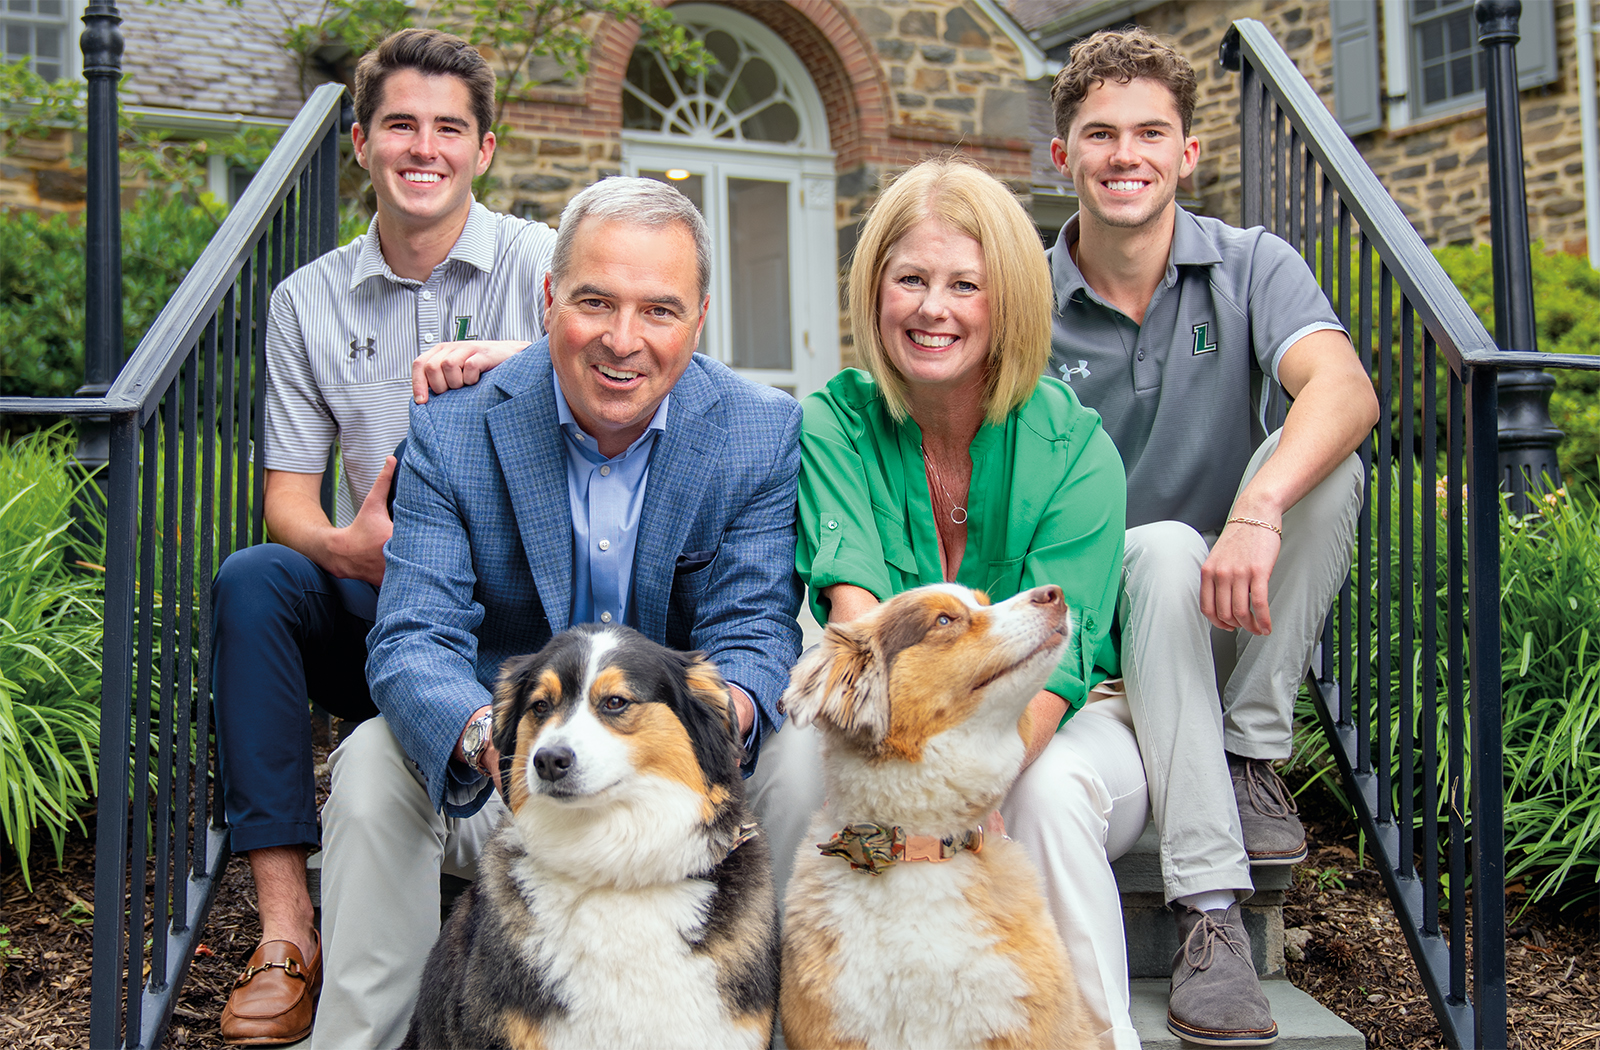 The Sawyer family pose for a photo with their two dogs sitting on the stairs outside their home